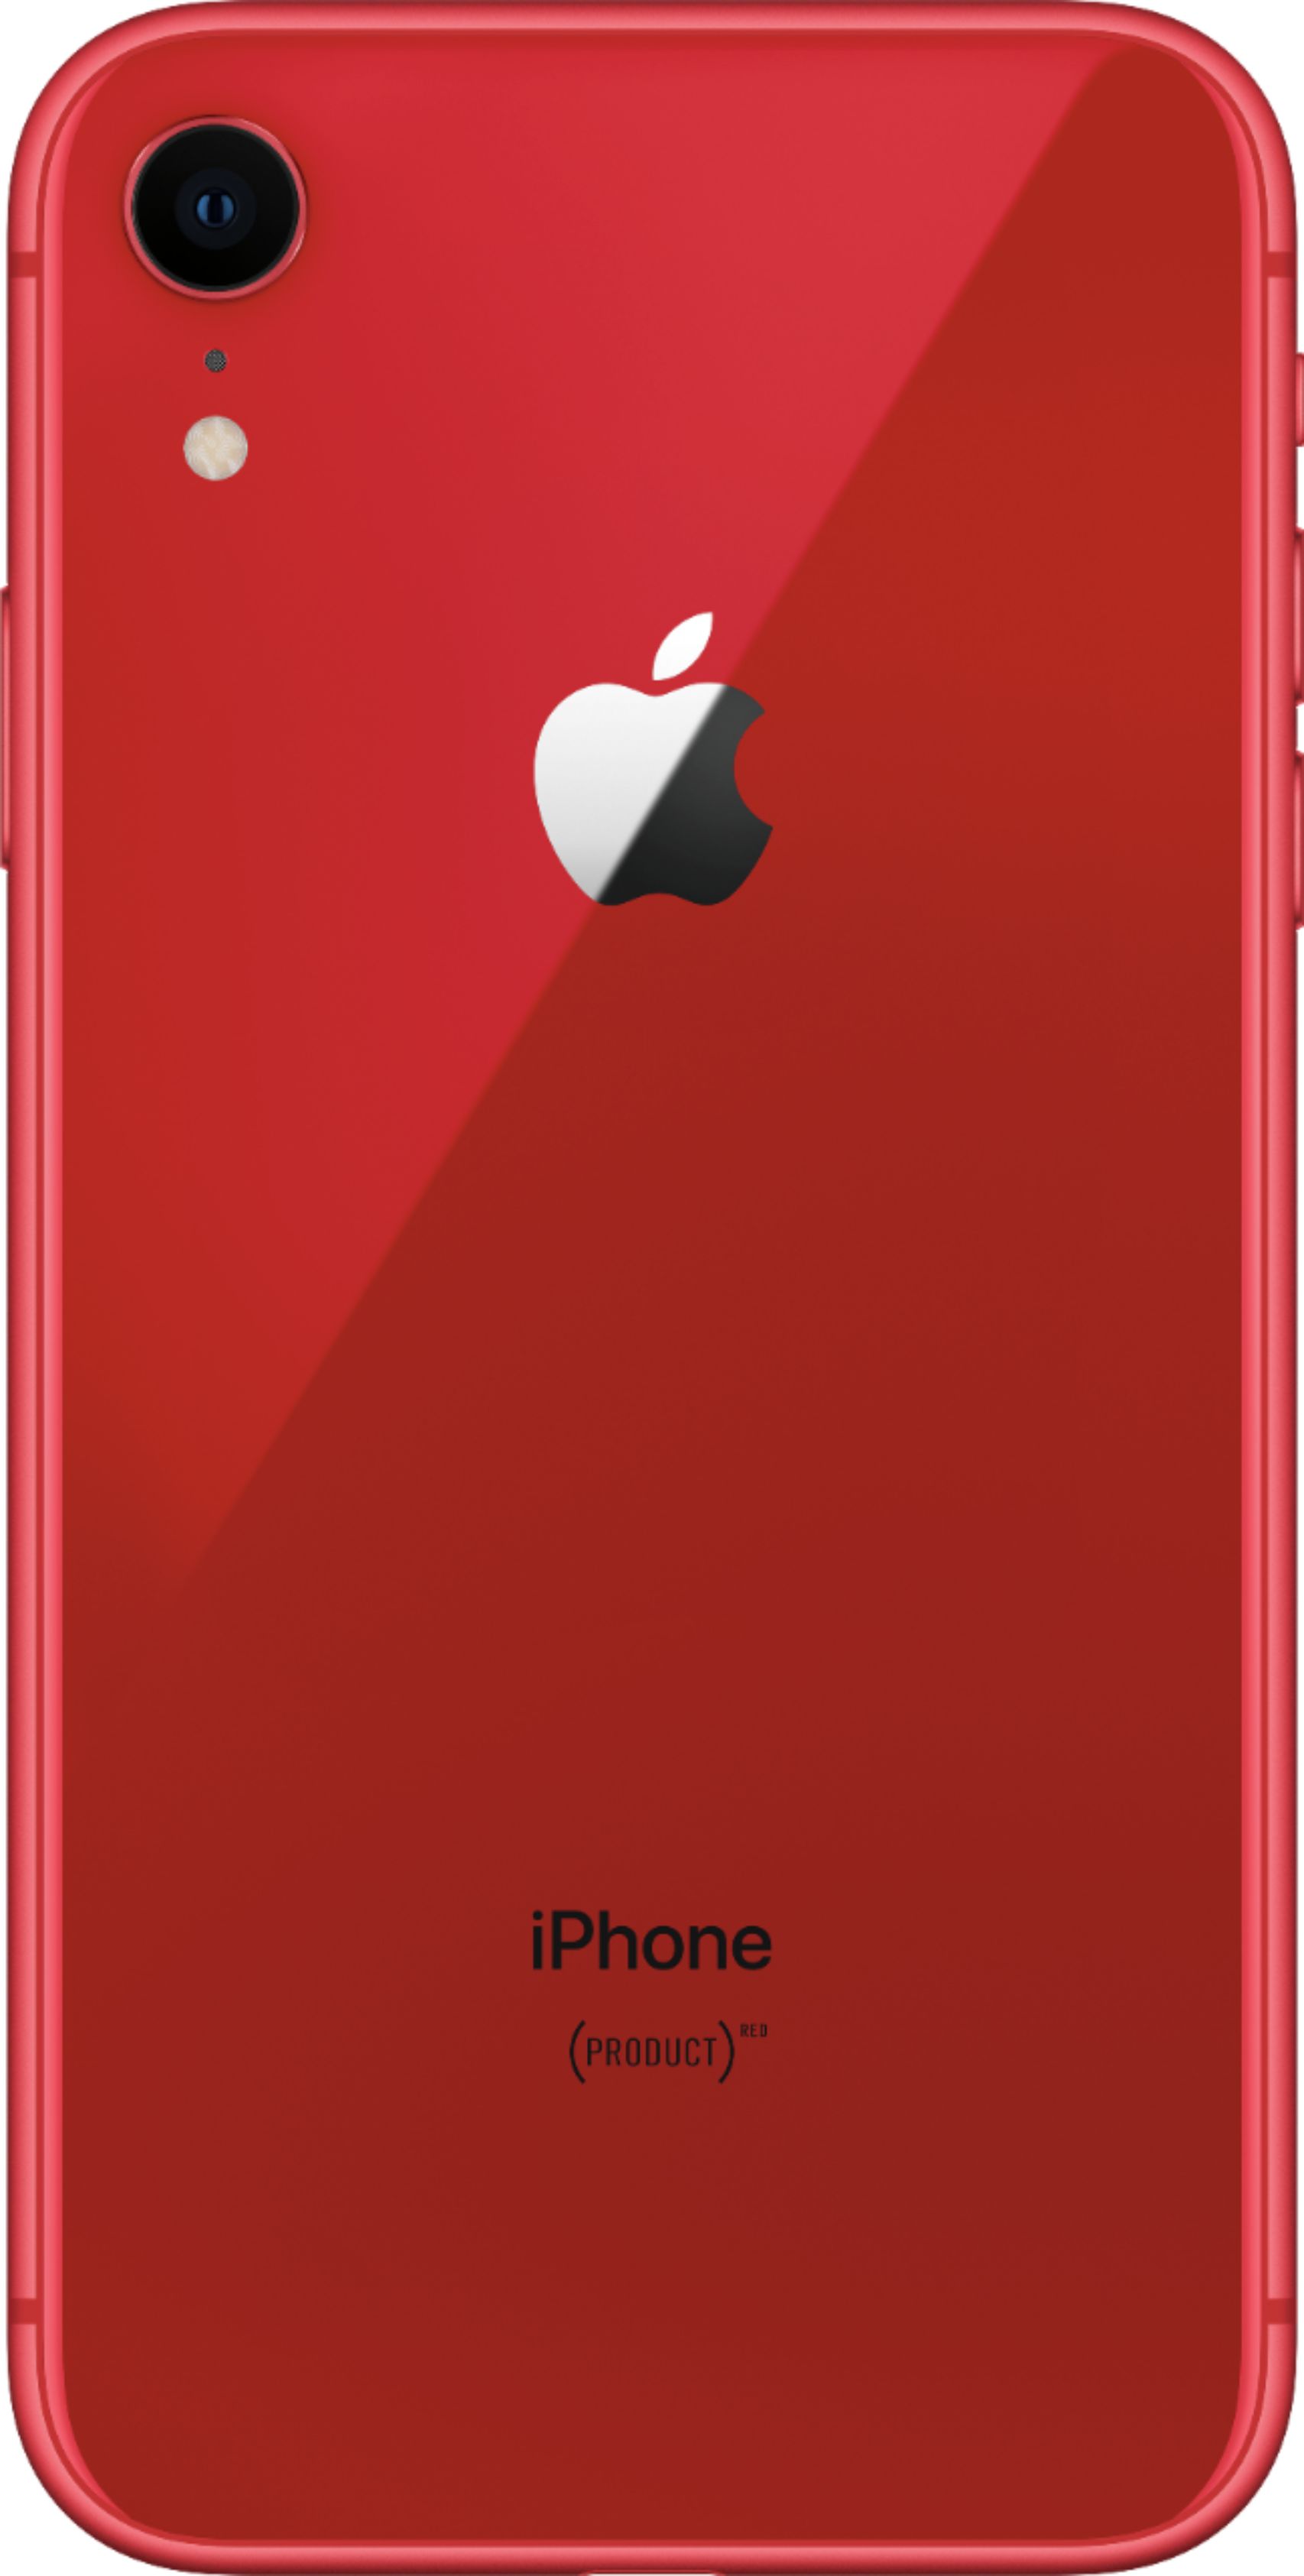 iPhone xr red 64GB